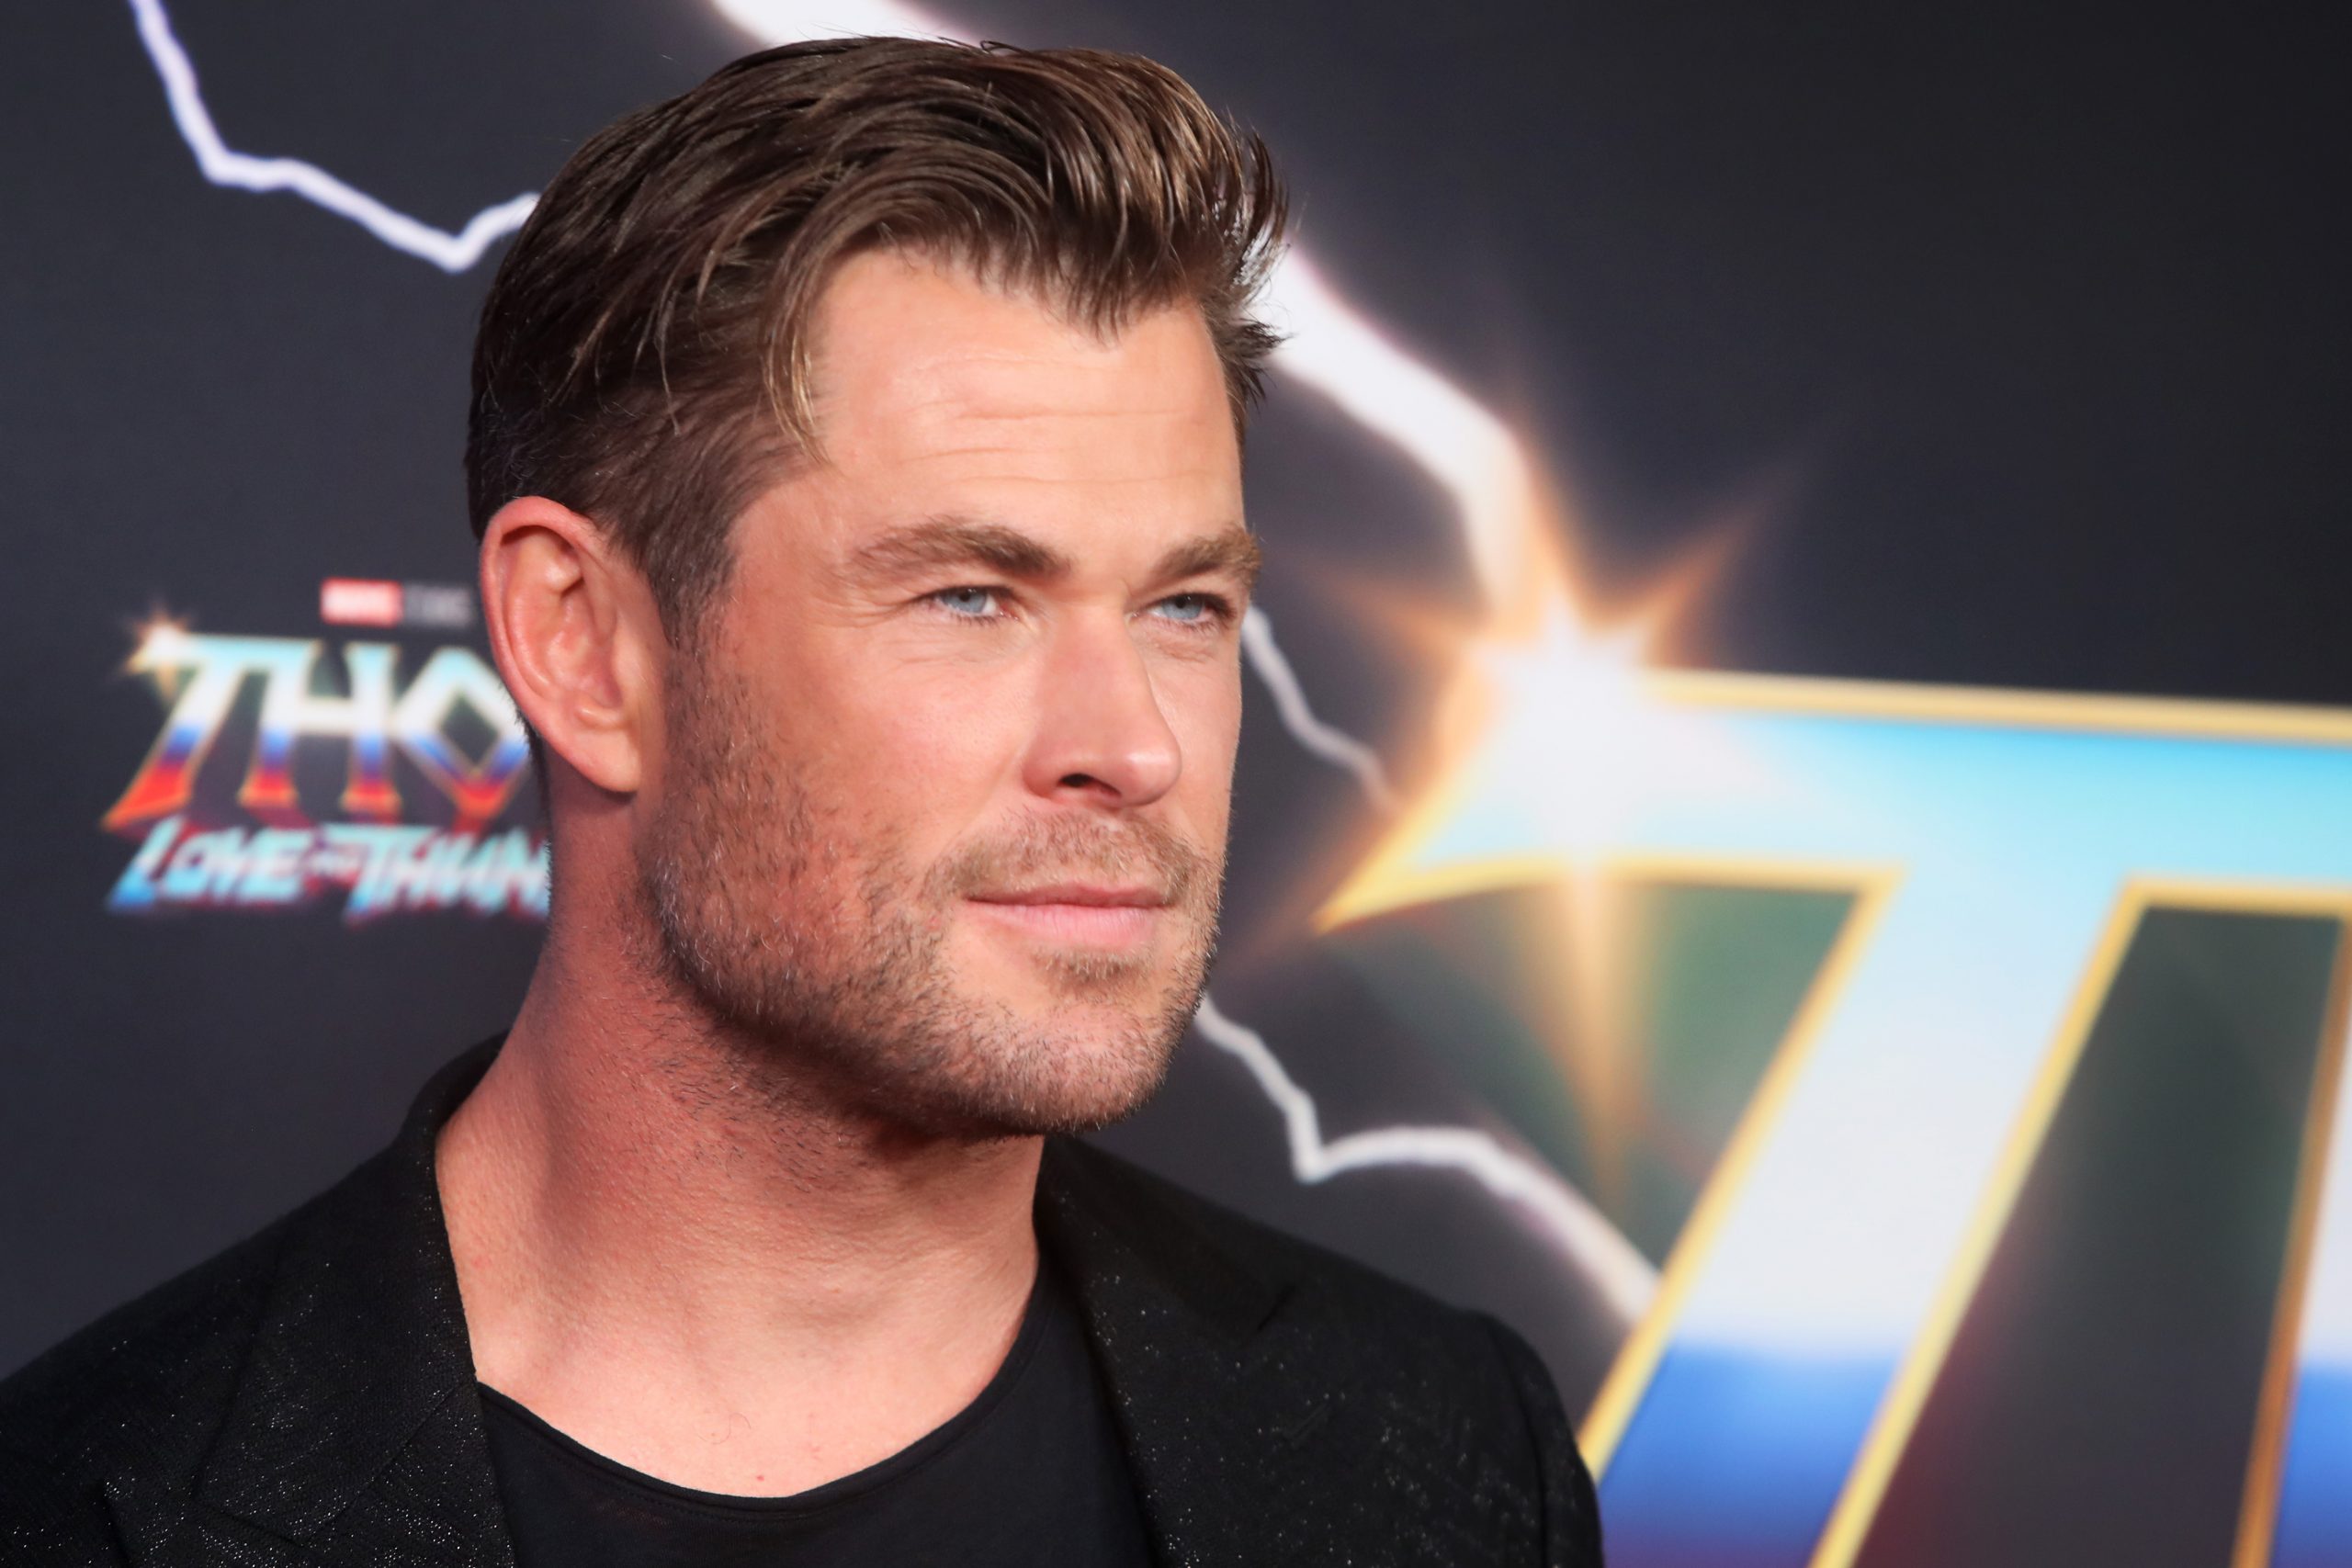 Chris Hemsworth, Alzheimer's and what to know about genetic testing